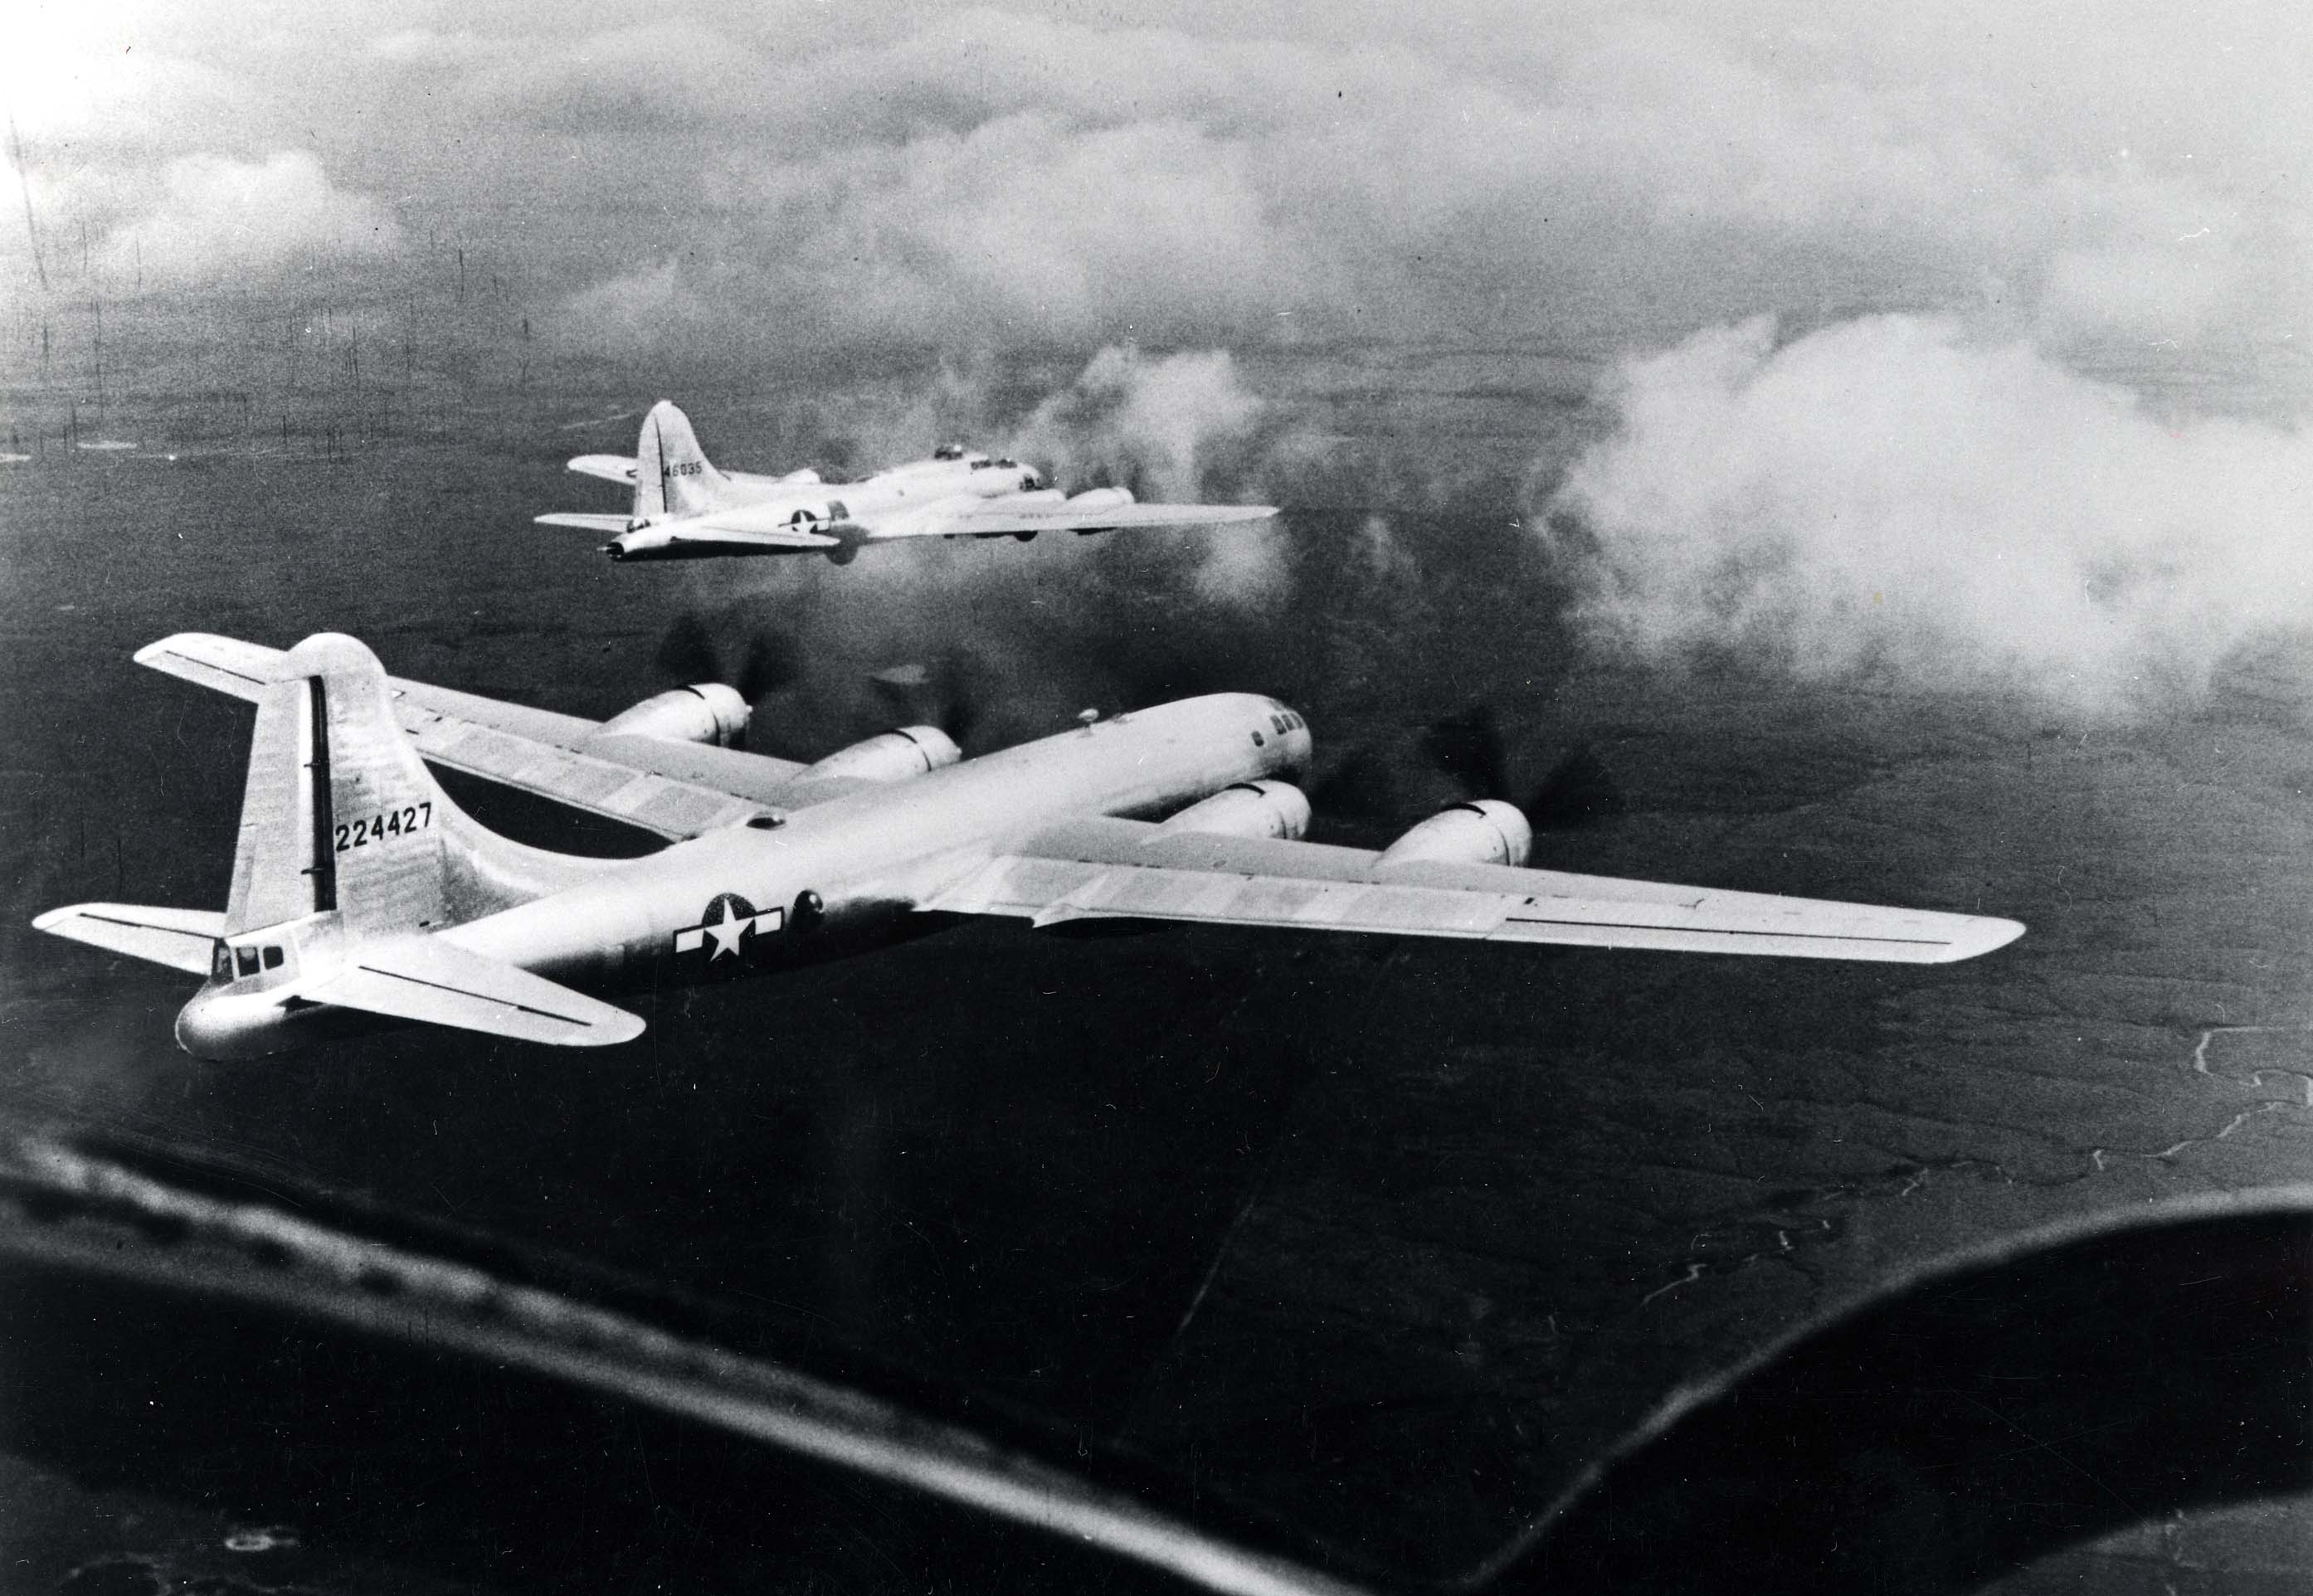 B-17 Flying Fortress bomber and B-29 Superfortress bomber in flight together during a test conducted by Boeing, circa late 1944, photo 2 of 3